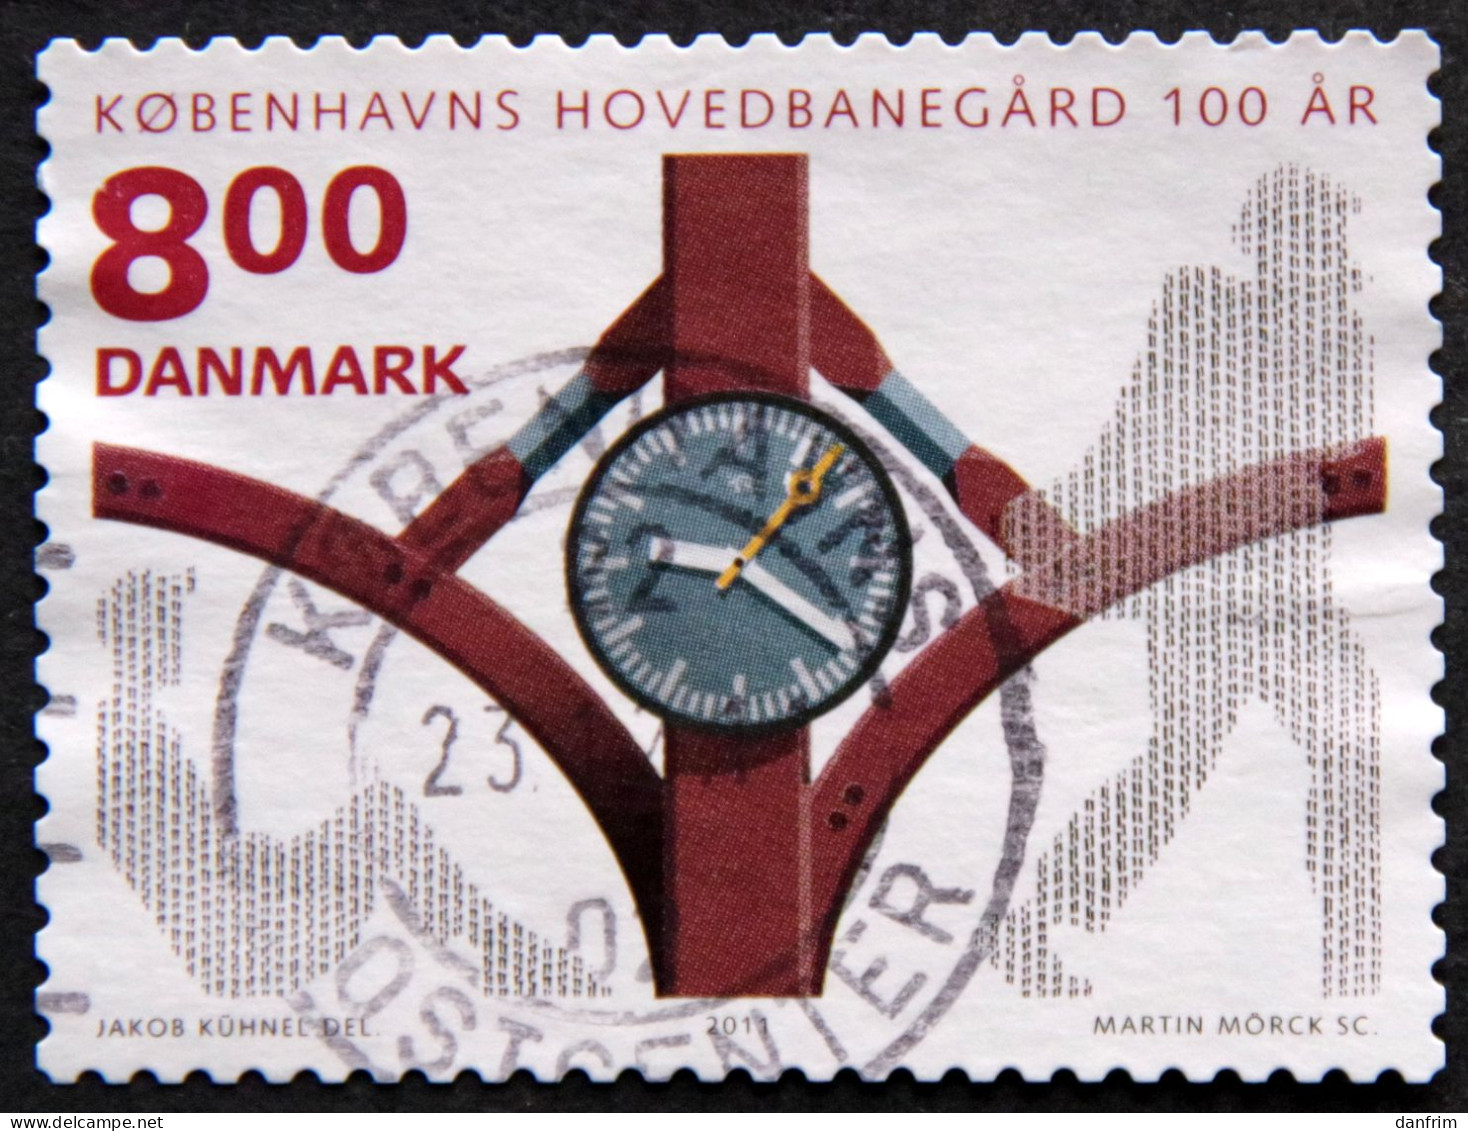 Denmark 2011 Copenhagen Central Station 100 Years  Minr.1670C     (O)  ( Lot B 2223 ) - Used Stamps